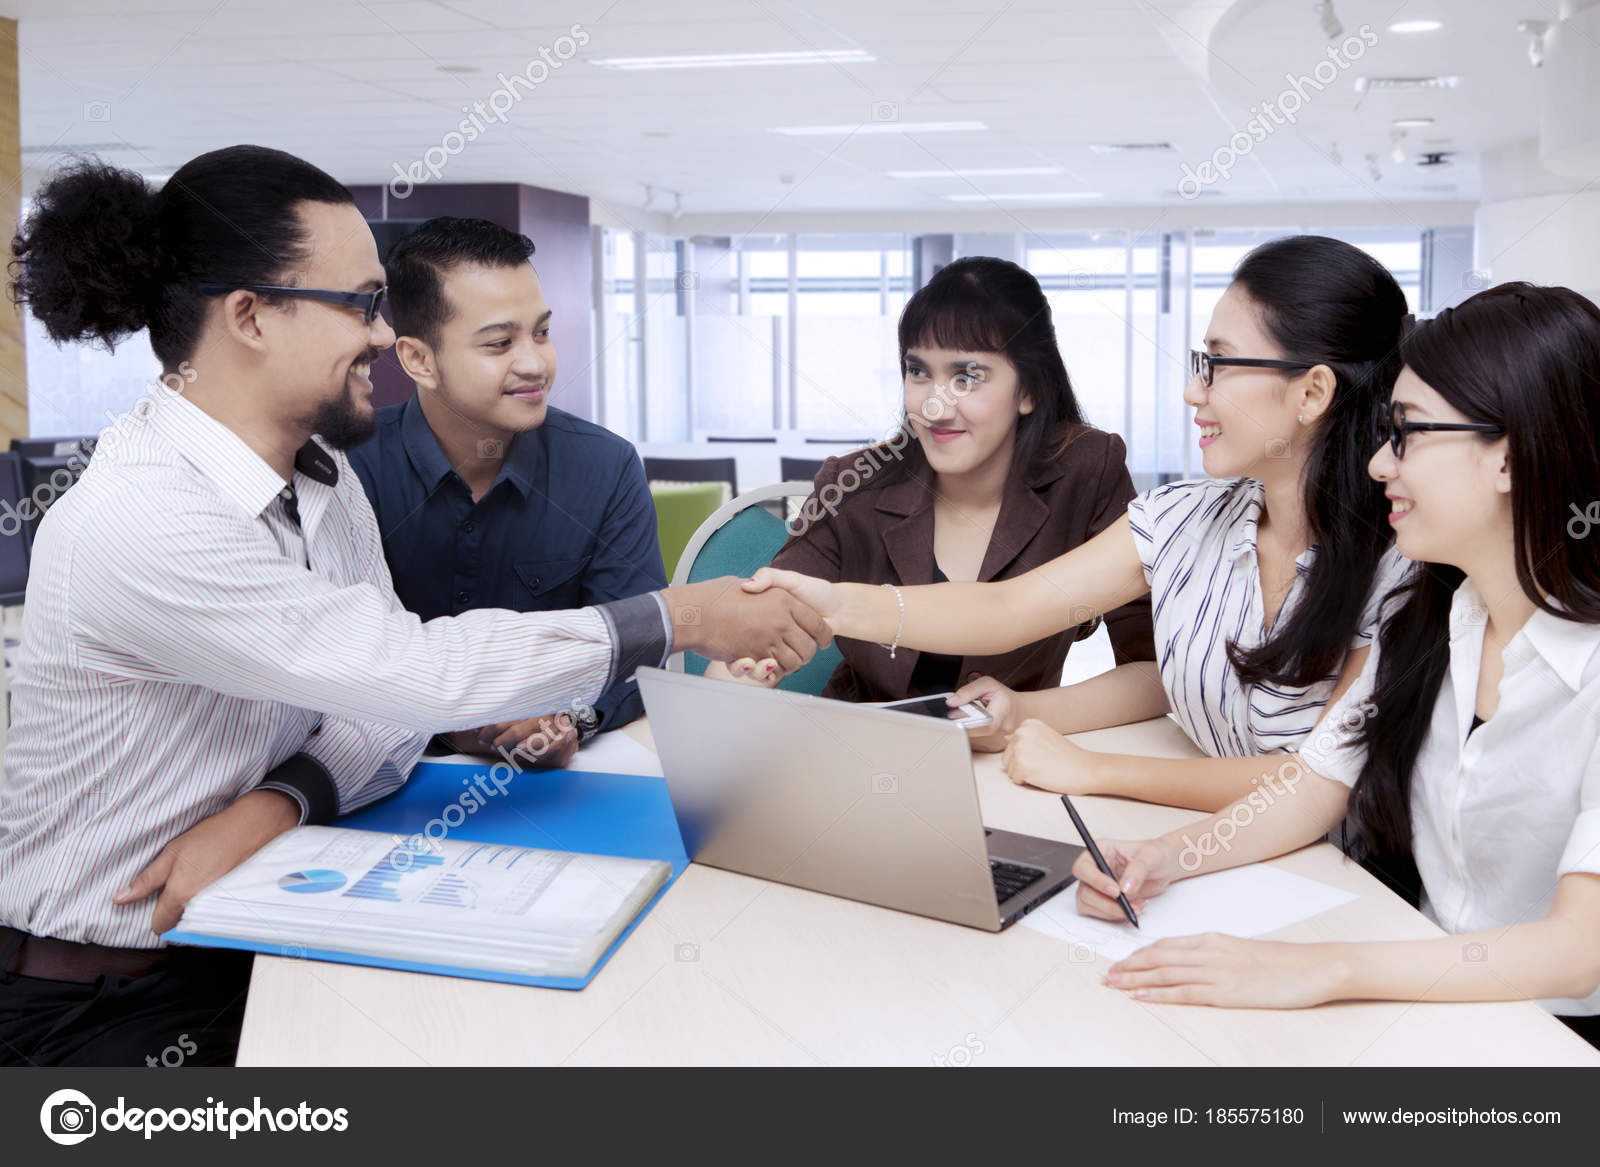 Come To An Agreement Group Of Business People Come To An Agreement During Meeting Stock